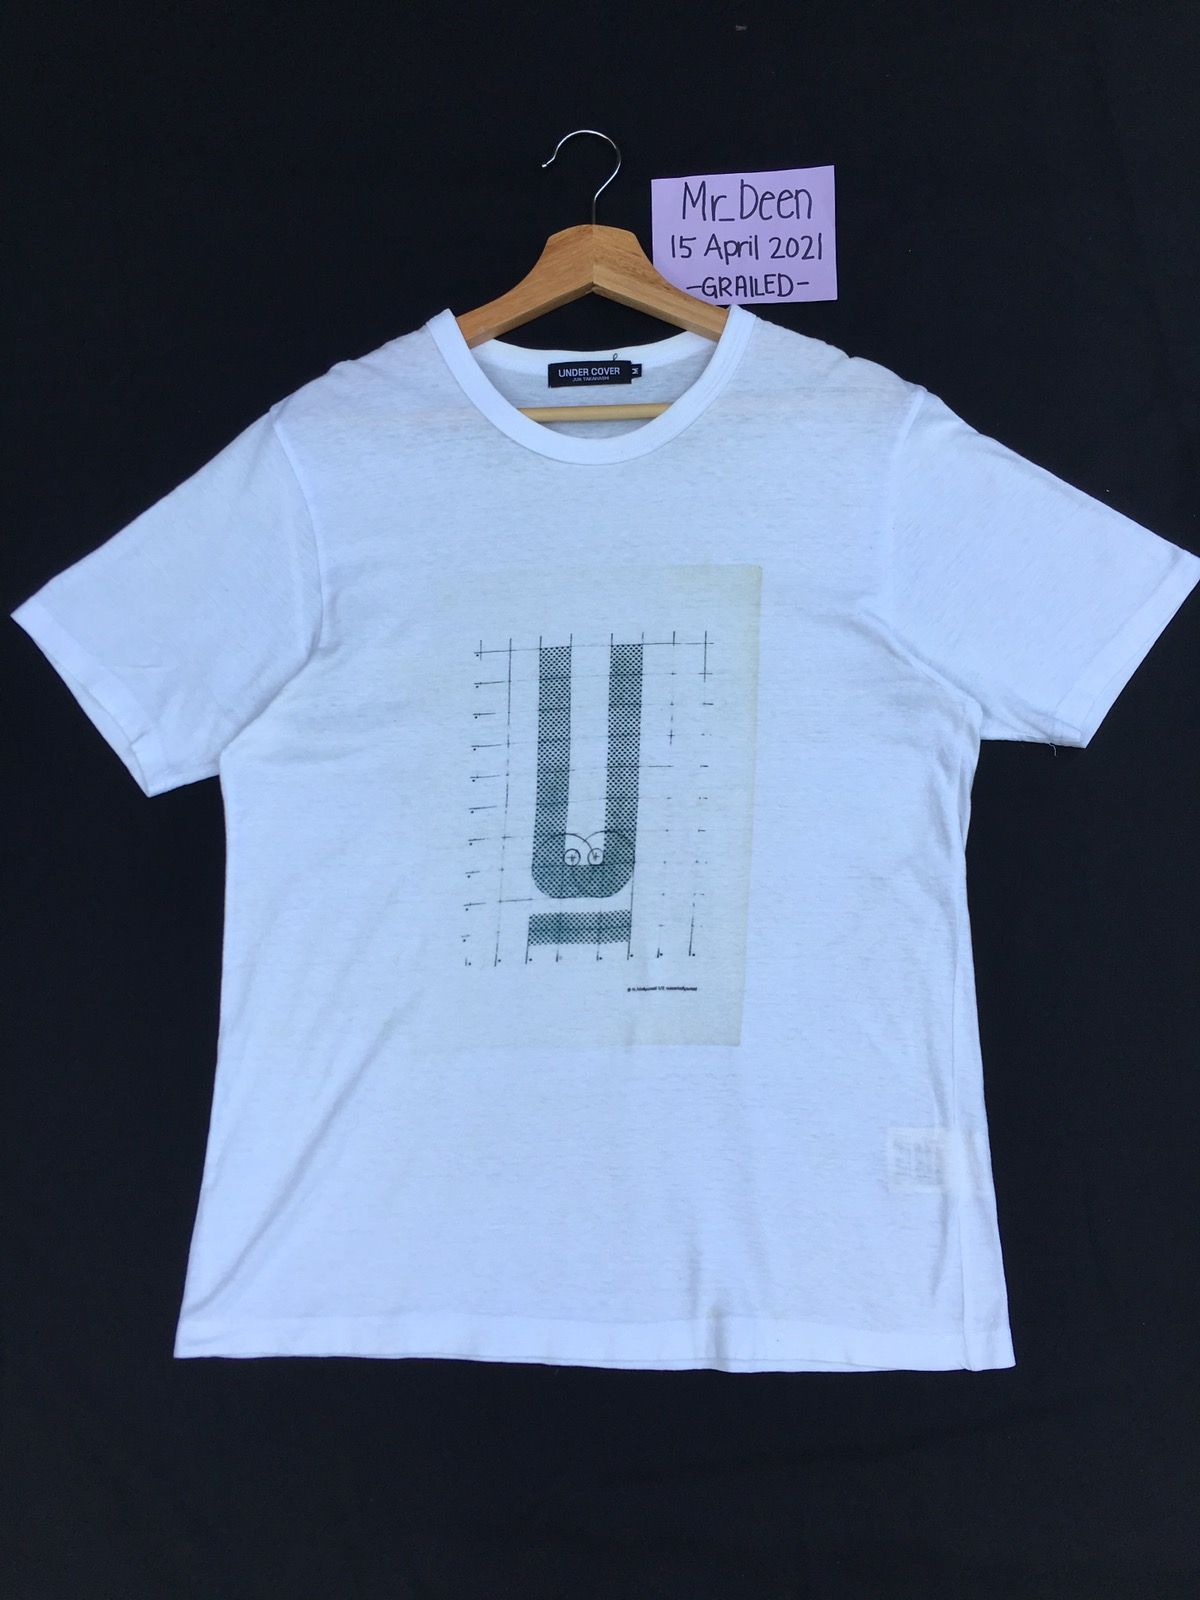 Undercover Rare Undercover x N. Hoolywood U Logo Tee | Grailed